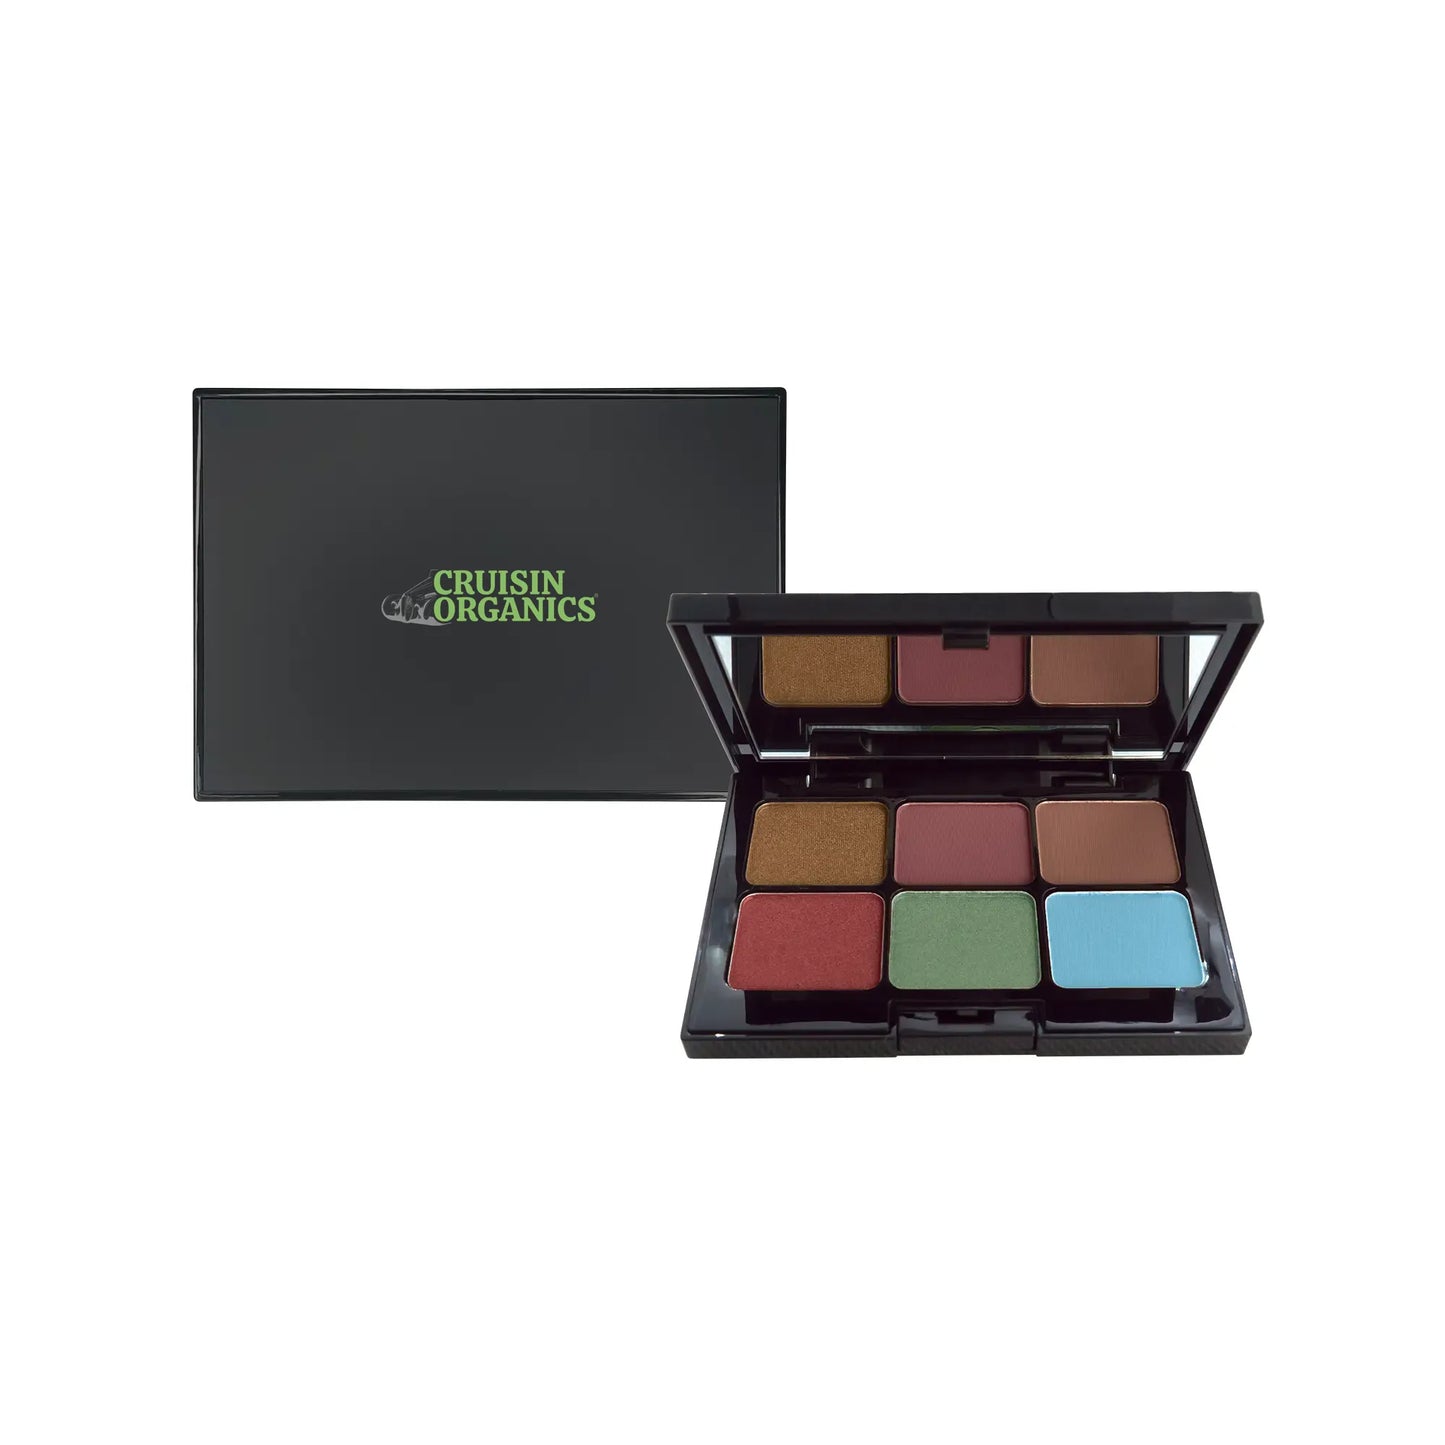 Attain a mesmerizing eye look with our creamy, six-shaded Cruisin Organics Magic eyeshadow palette. buildable texture, so you can blend or layer effortlessly for greater shade intensity to complete your full look. Highly pigmented, the soft, shimmering, or matte shades stay on your eyelids with a luminous, silky finish. Our formula allows easy and gentle application, so you won’t damage the delicate skin around your eyes.